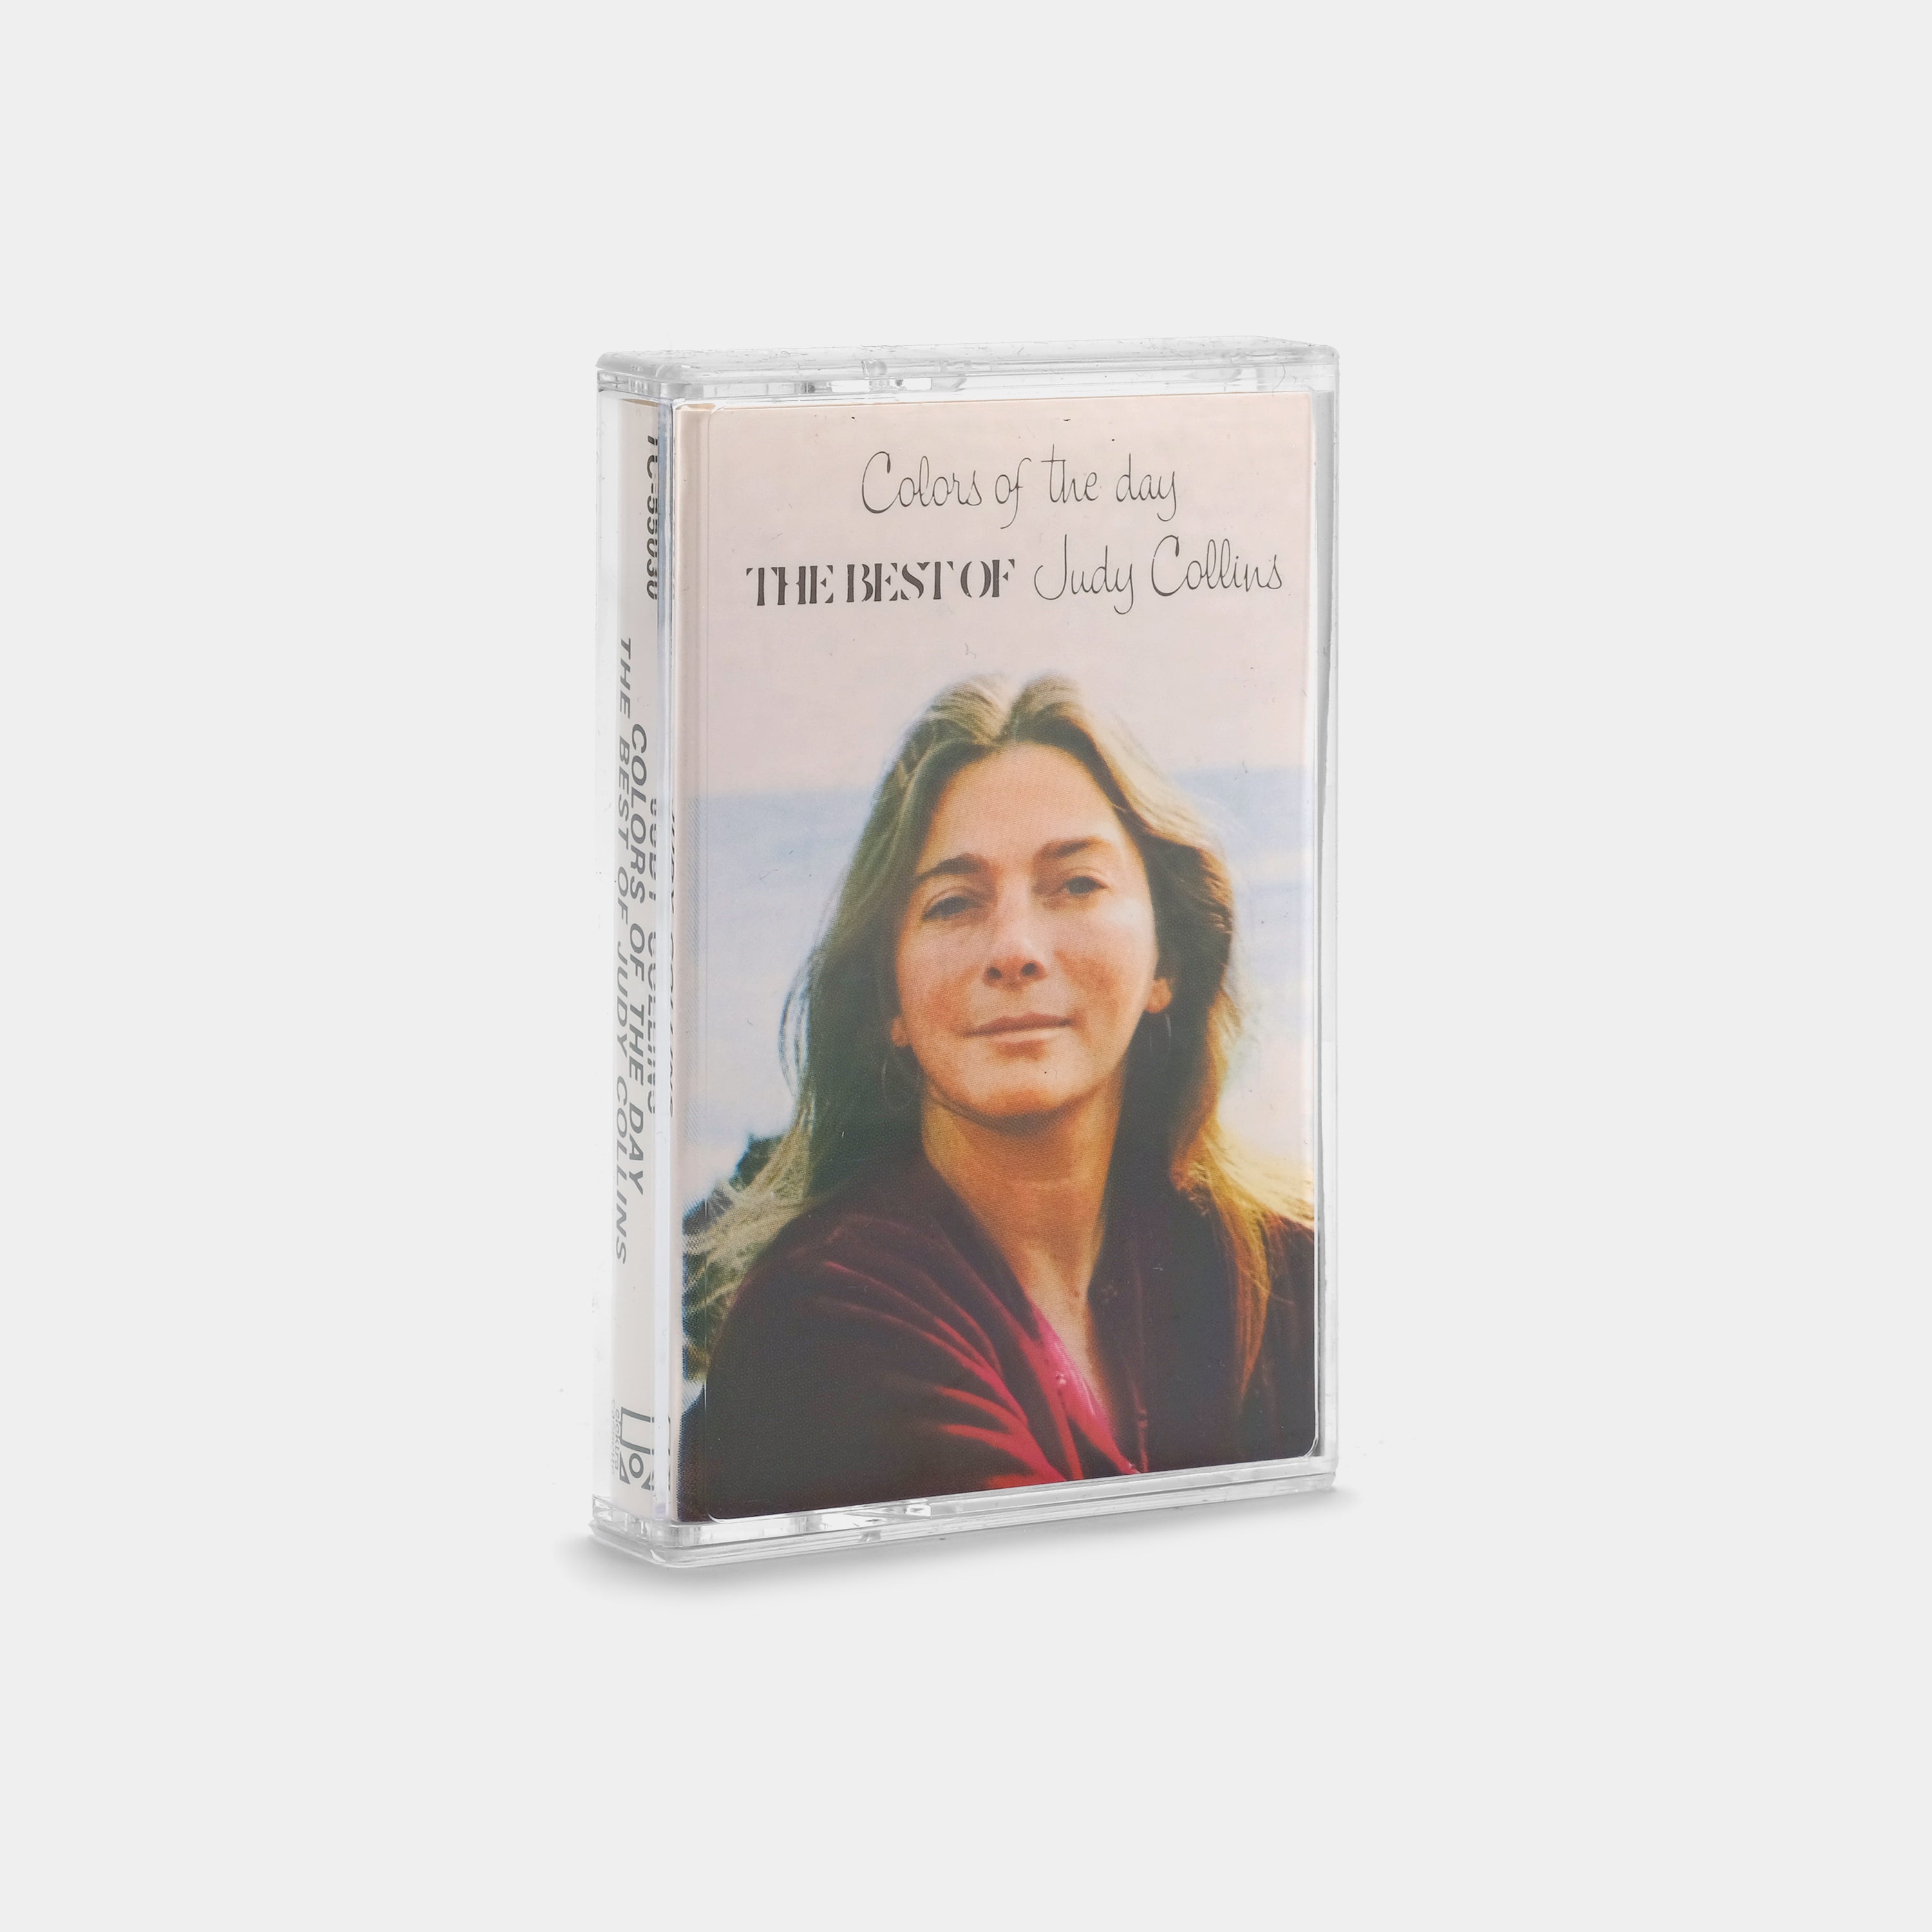 Judy Collins - Colors of the Day: The best of Judy Collins Cassette Tape